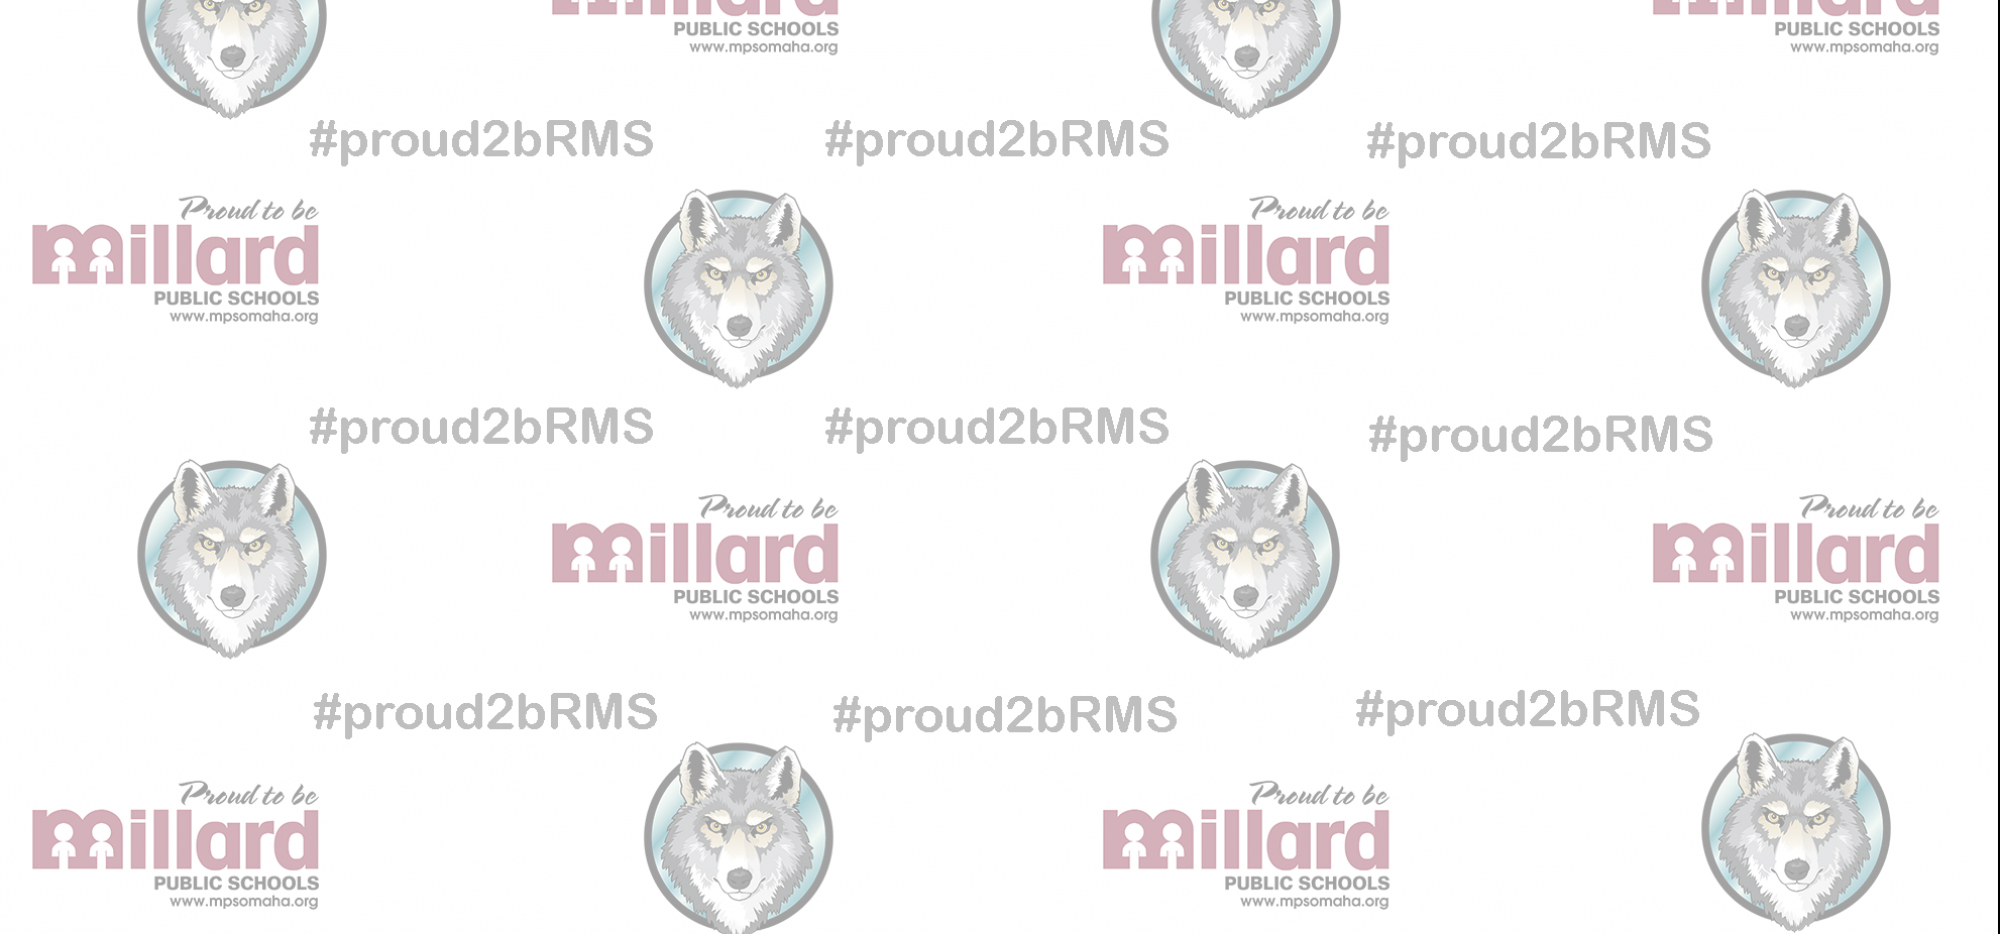 RMS logo and #proud2bRMS